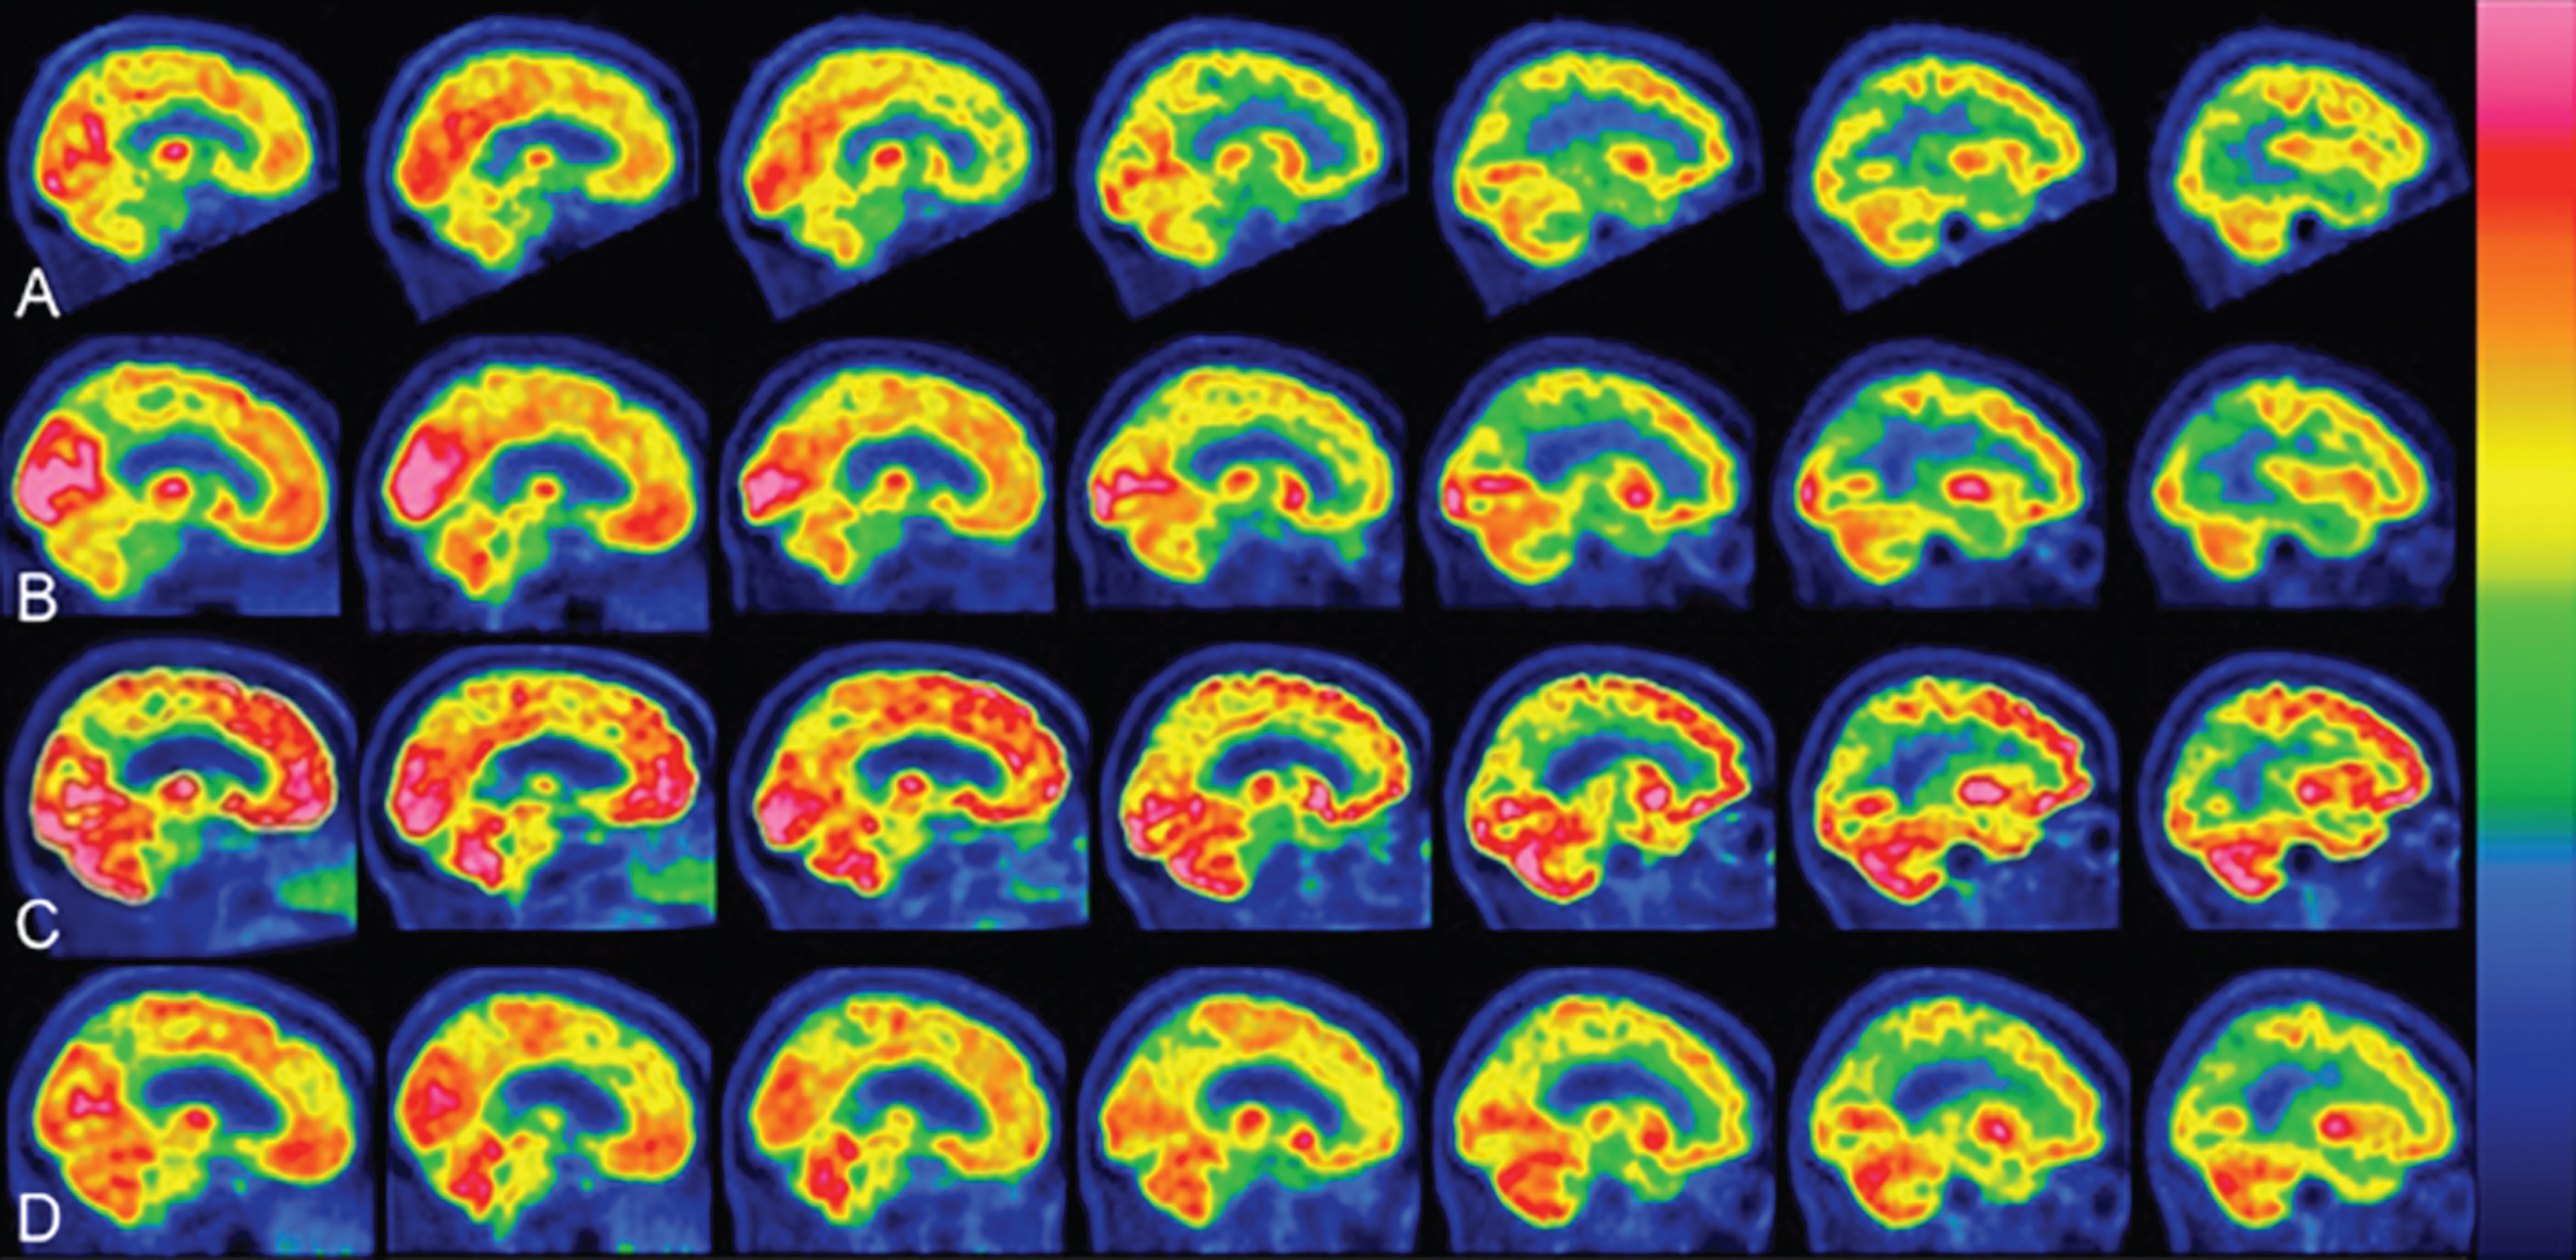 18 FDG PET-scan sagittal sections. Matching of representative sagittal sections showed a significant increase in the brain metabolism during NGF-treatment (10 μl NGF daily). Flame scale indicates FDG use/100 g tissue/min. Red color indicates more FDG-use than blue. A) Before treatment, note FDG-uptake reduction in the following brain areas: frontotemporal lobes left>right, basal ganglia, cerebellum. B) After 3 months of NGF-treatment (5 μl NGF per nostril daily), note a significant increase in FDG-uptake (p <  0.05) in the occipital and frontotemporal lobes. C) After 1 year of NGF-treatment (5 μl NGF per nostril daily), the PET scans showed further enhancement of FDG-uptake (p <  0.05) in the same brain areas as in (B) and also in paraolfactory area, posterior cortex of cingulate gyrus, cerebellum. D) After 1 year of stopping NGF-treatment, the brain areas showed a significant reduction in global activities.